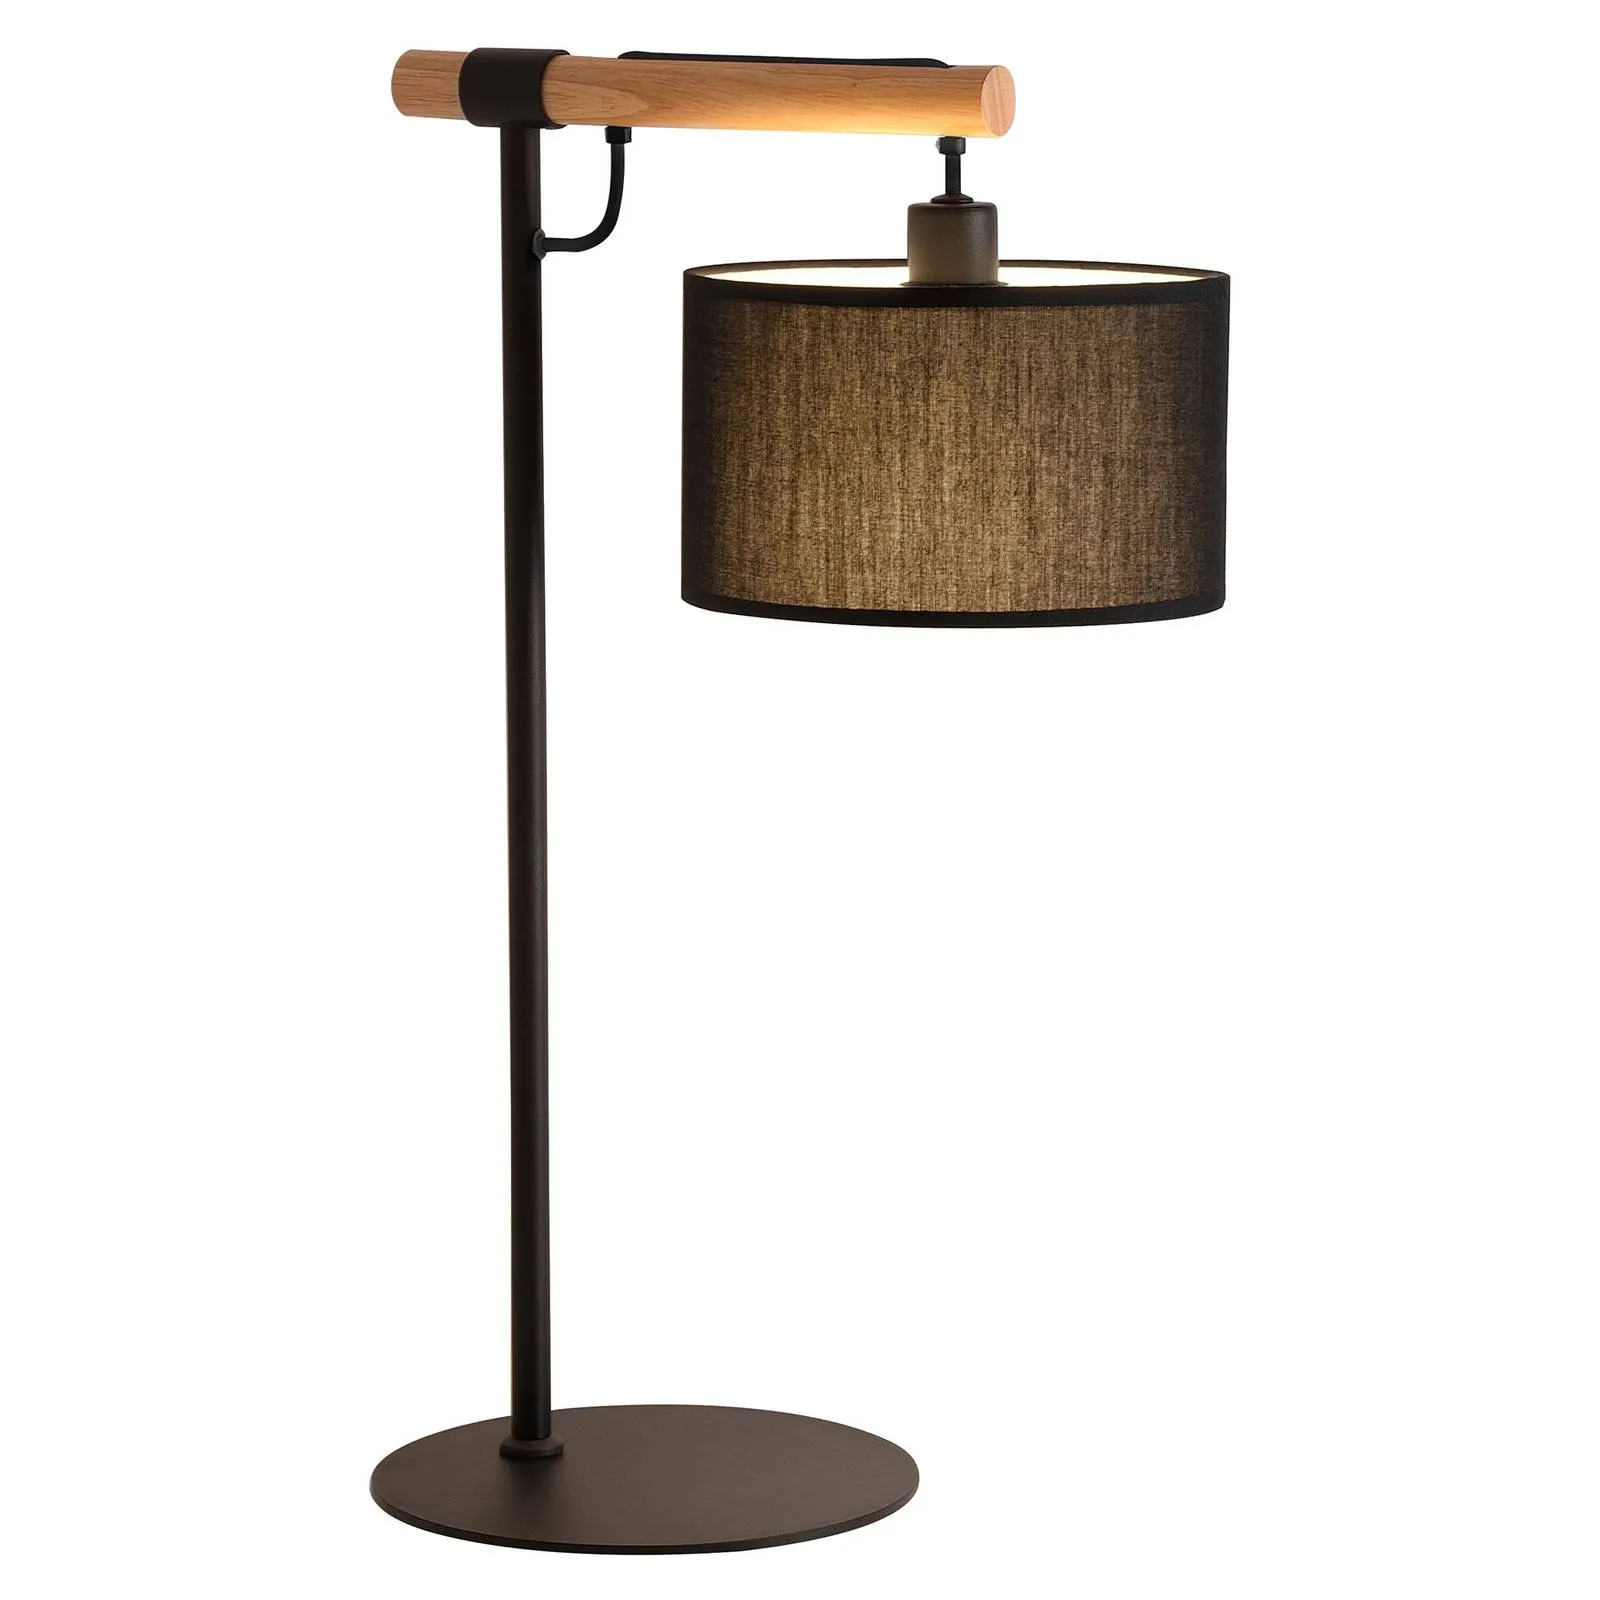 Romeo table lamp with a fabric lampshade, black